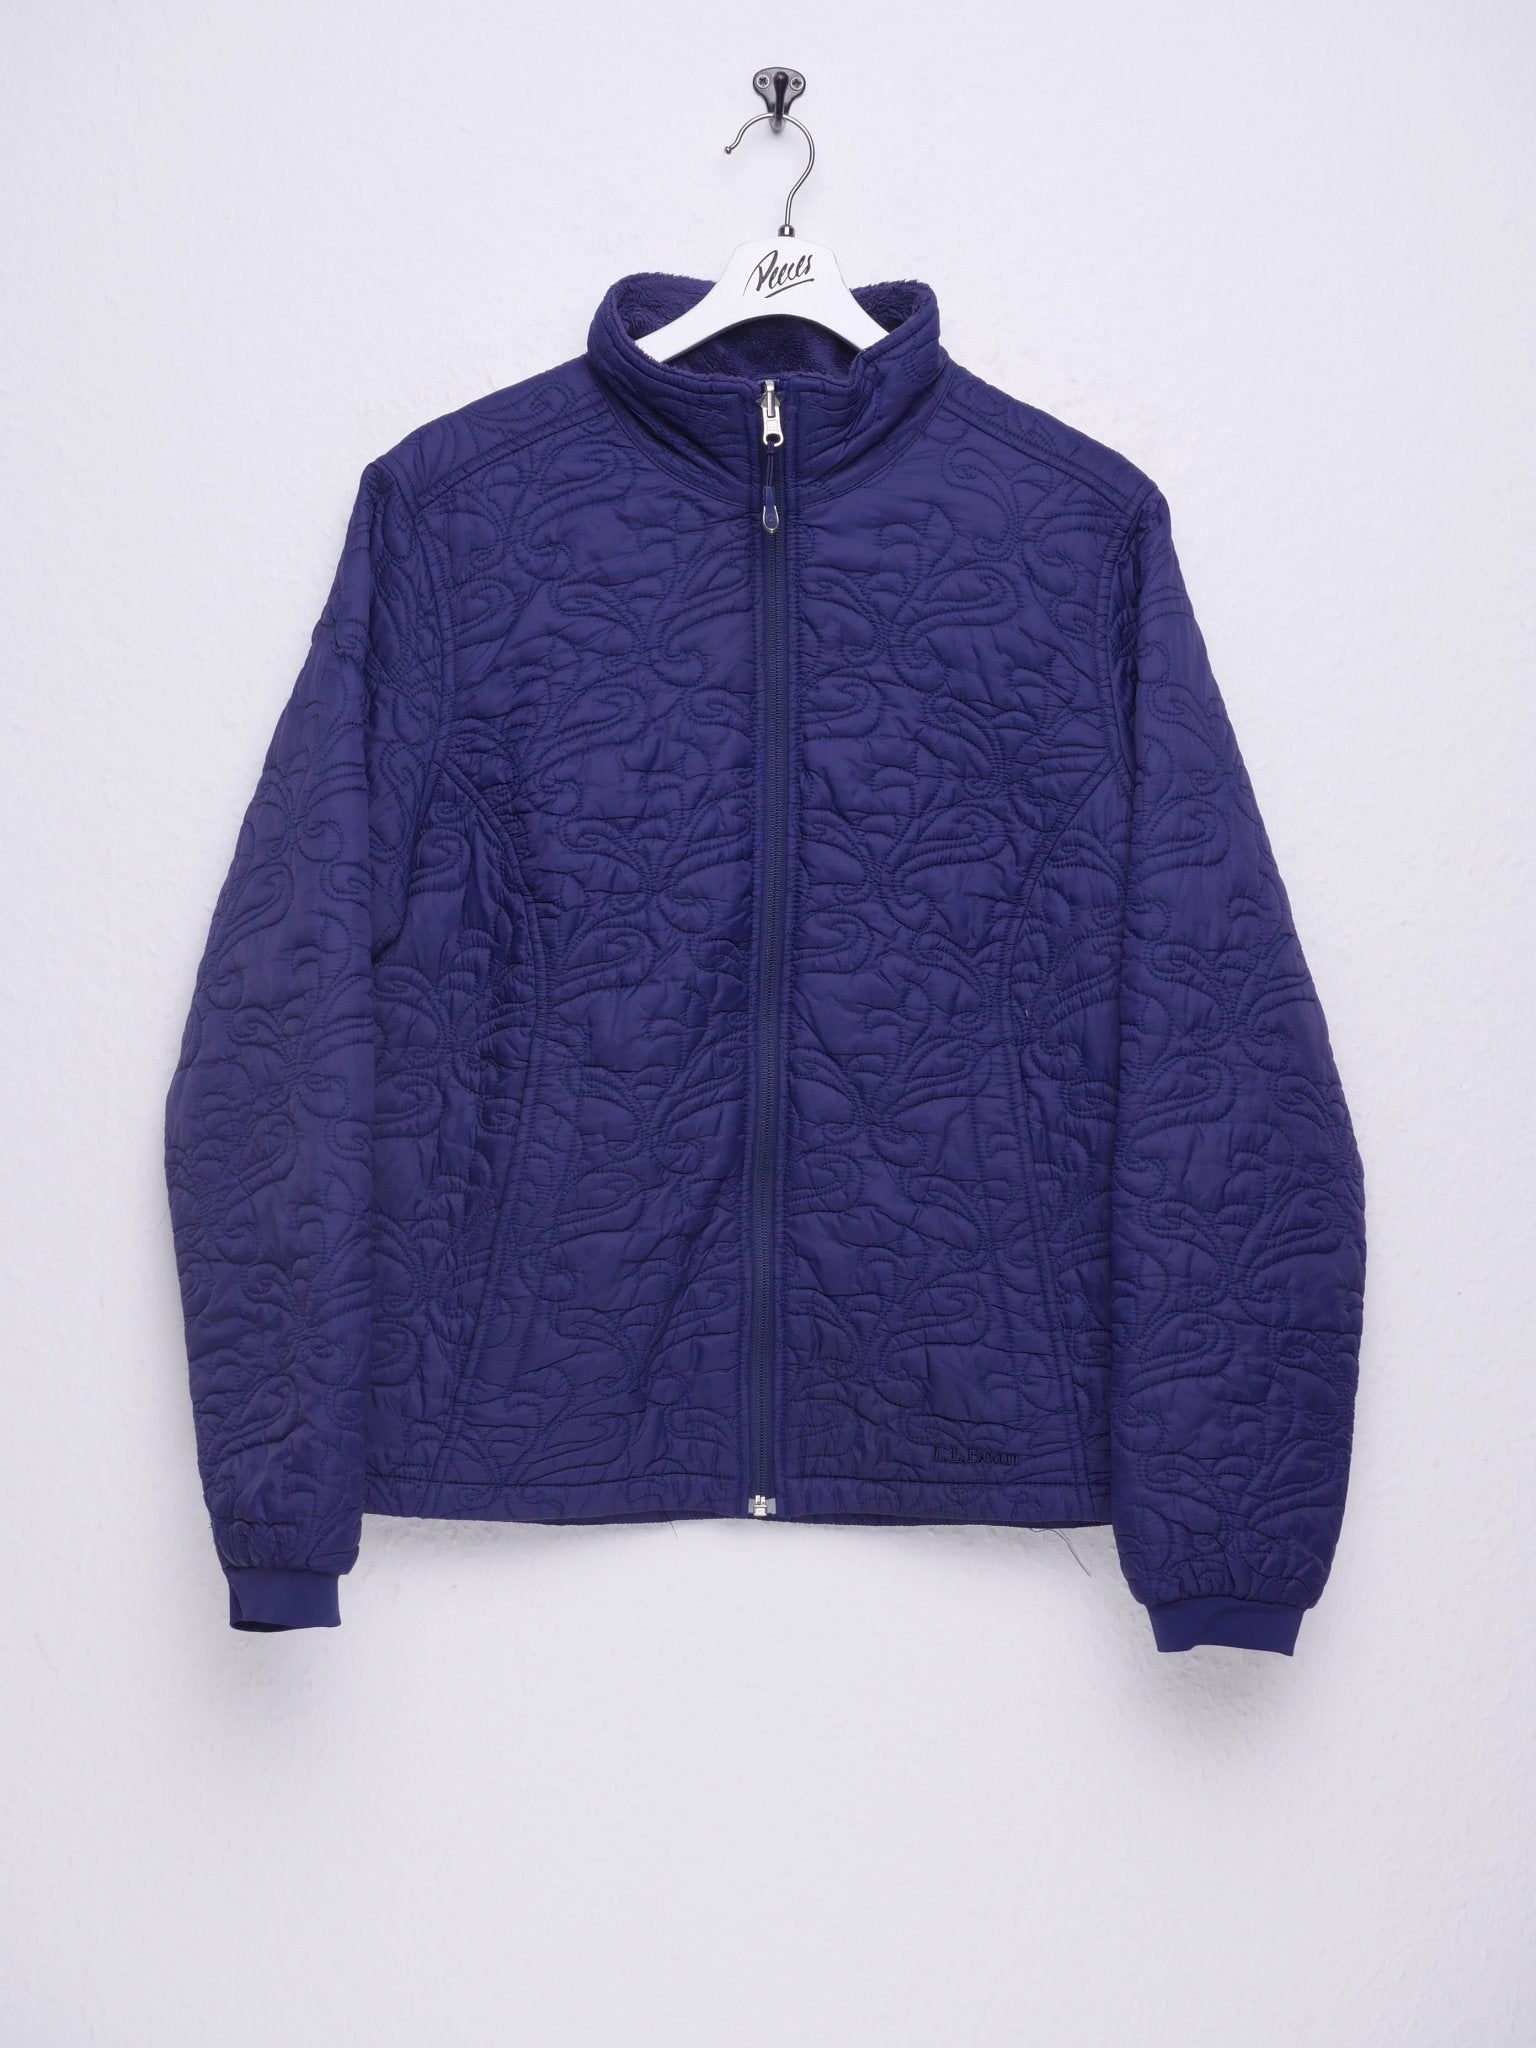 LL Bean embroidered Logo navy patterned light Jacke - Peeces